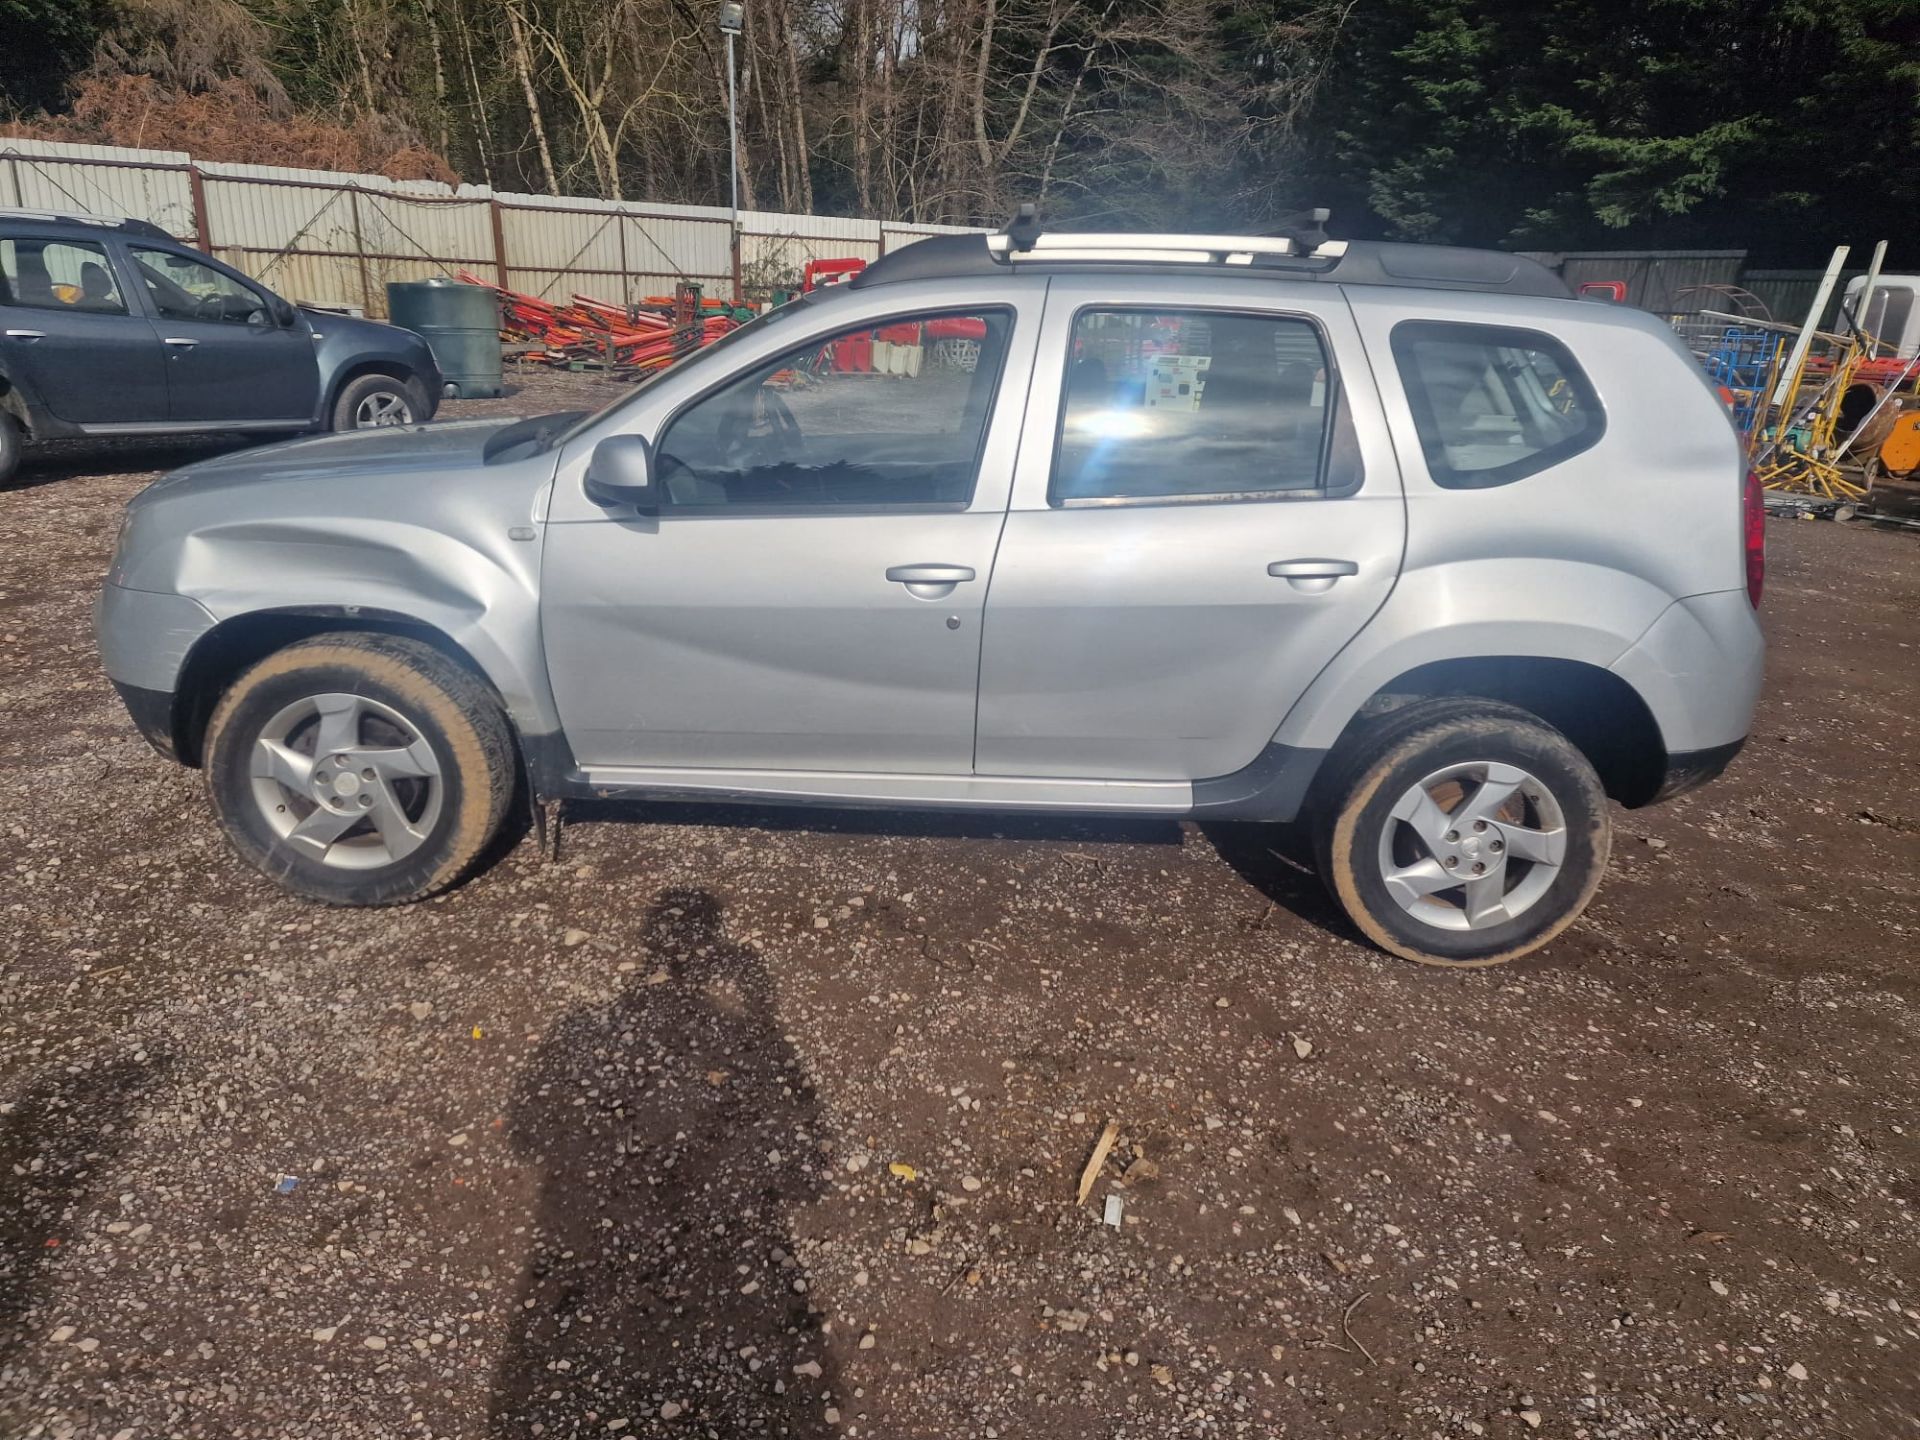 14/14 DACIA DUSTER LAUREATE DCI 4X2 - 1461cc 5dr Hatchback (Silver) - Image 7 of 12